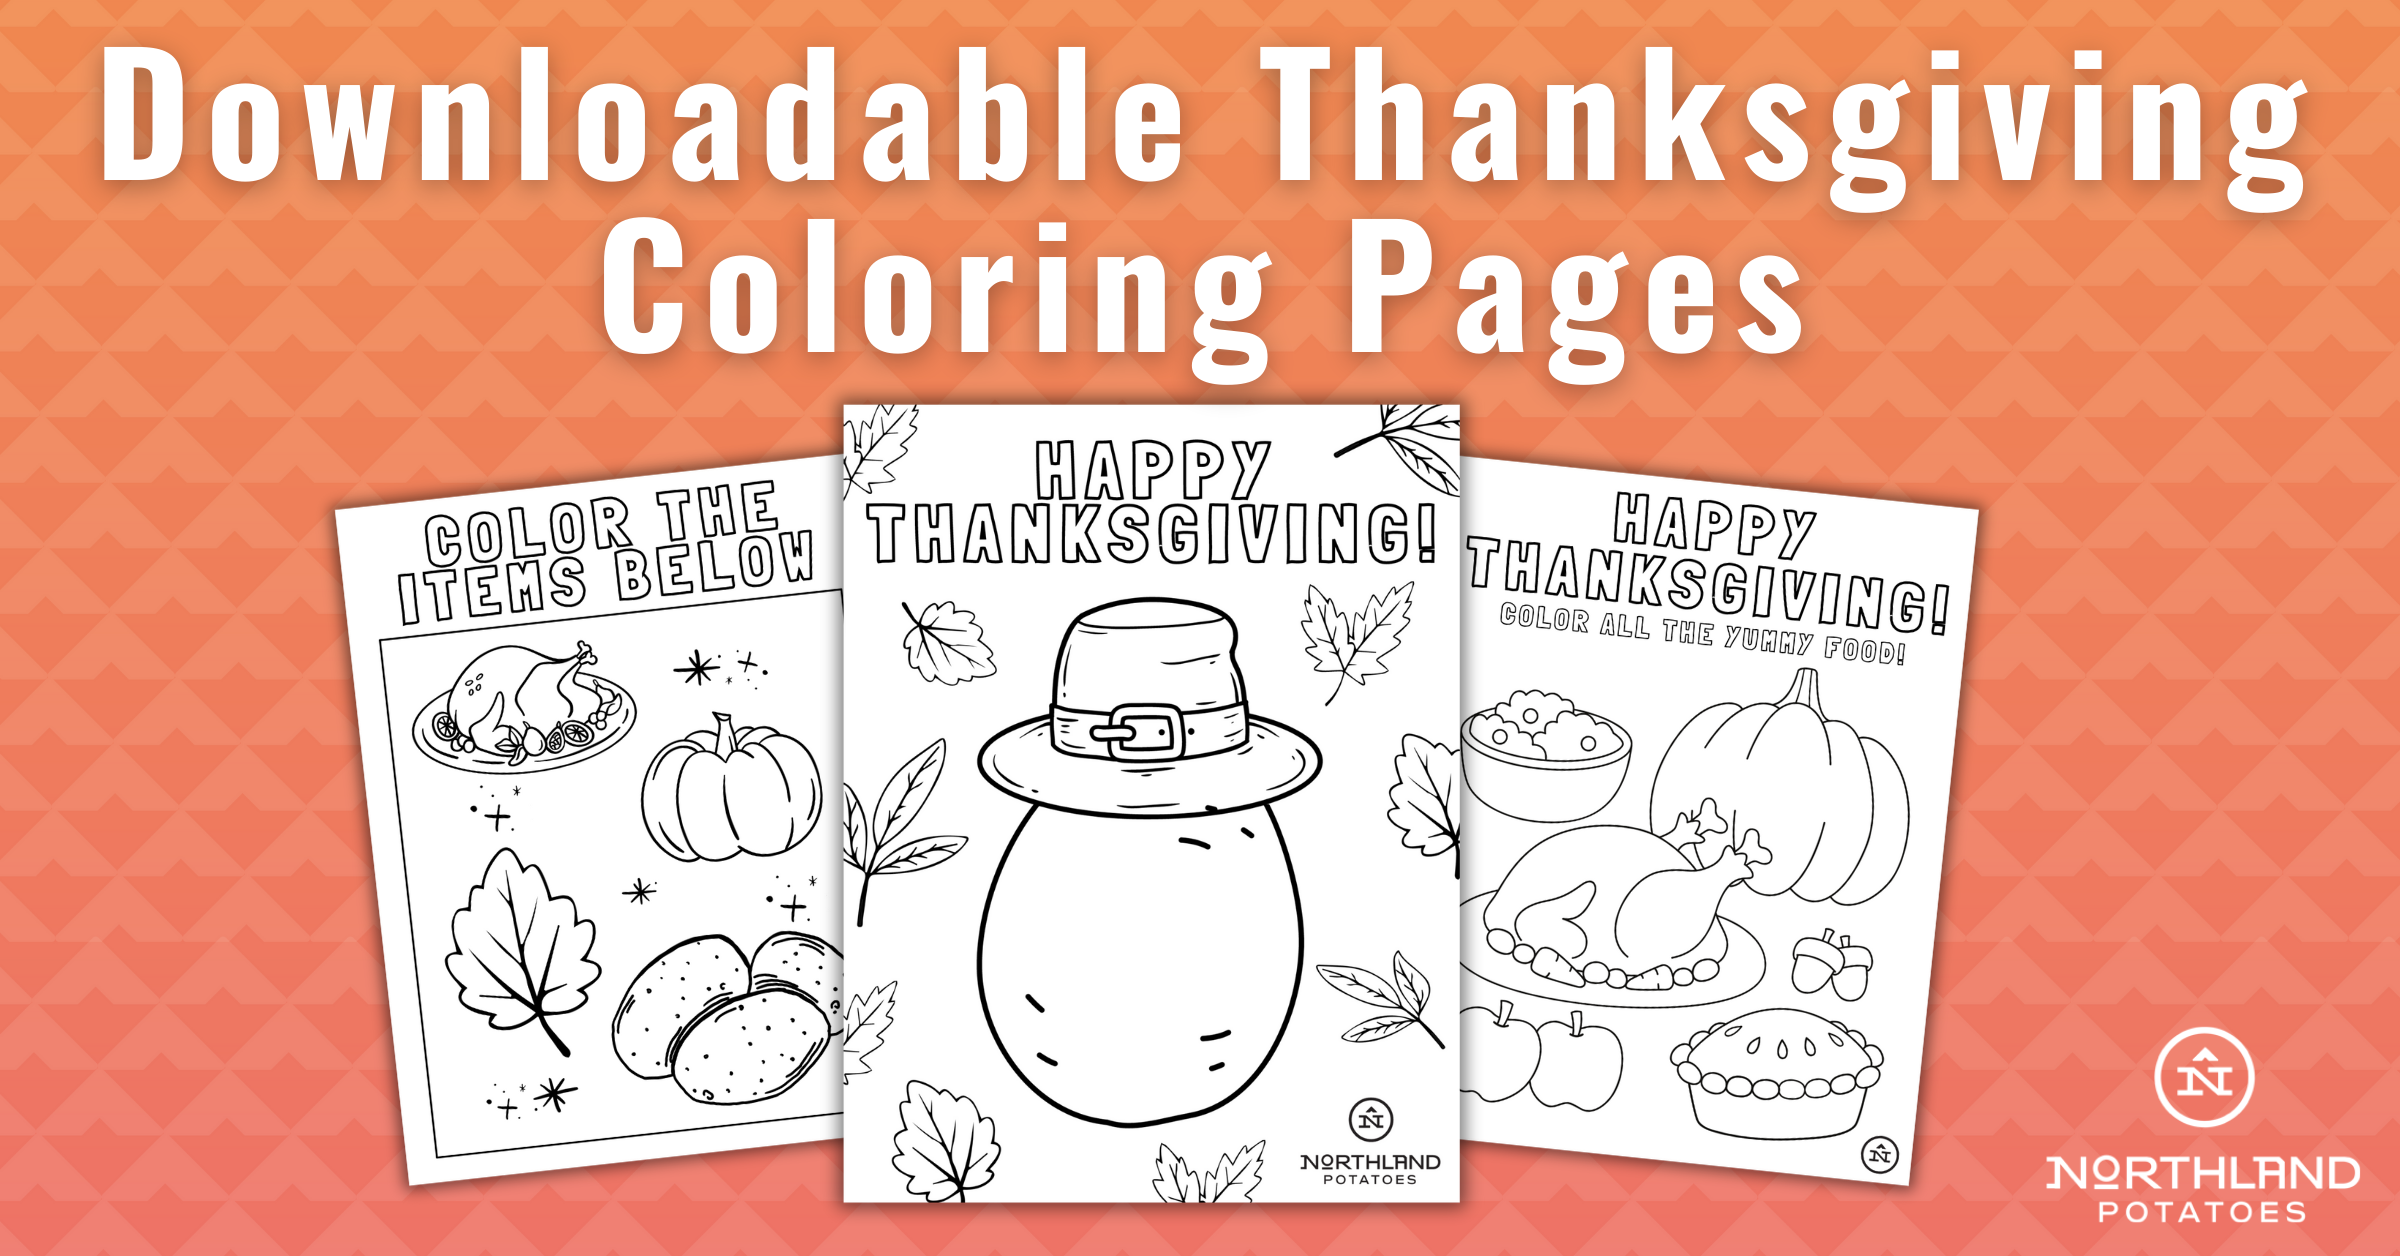 Downloadable Thanksgiving Coloring Pages for Kids